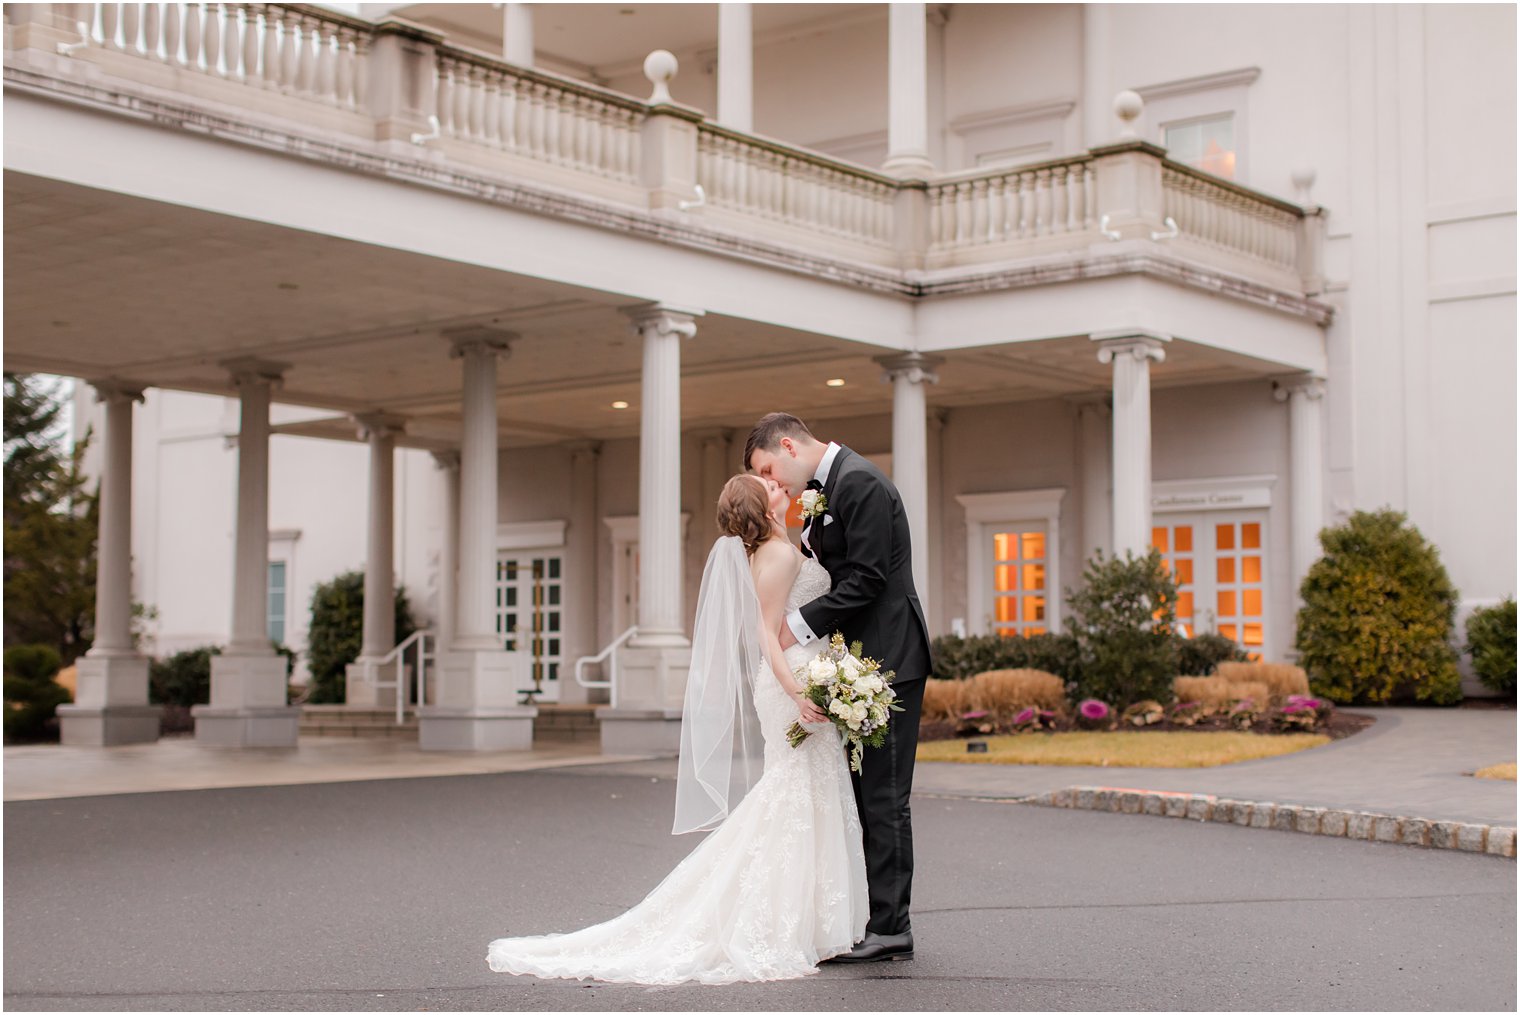 Bride and groom portraits at The Palace at Somerset Park in Somerset NJ